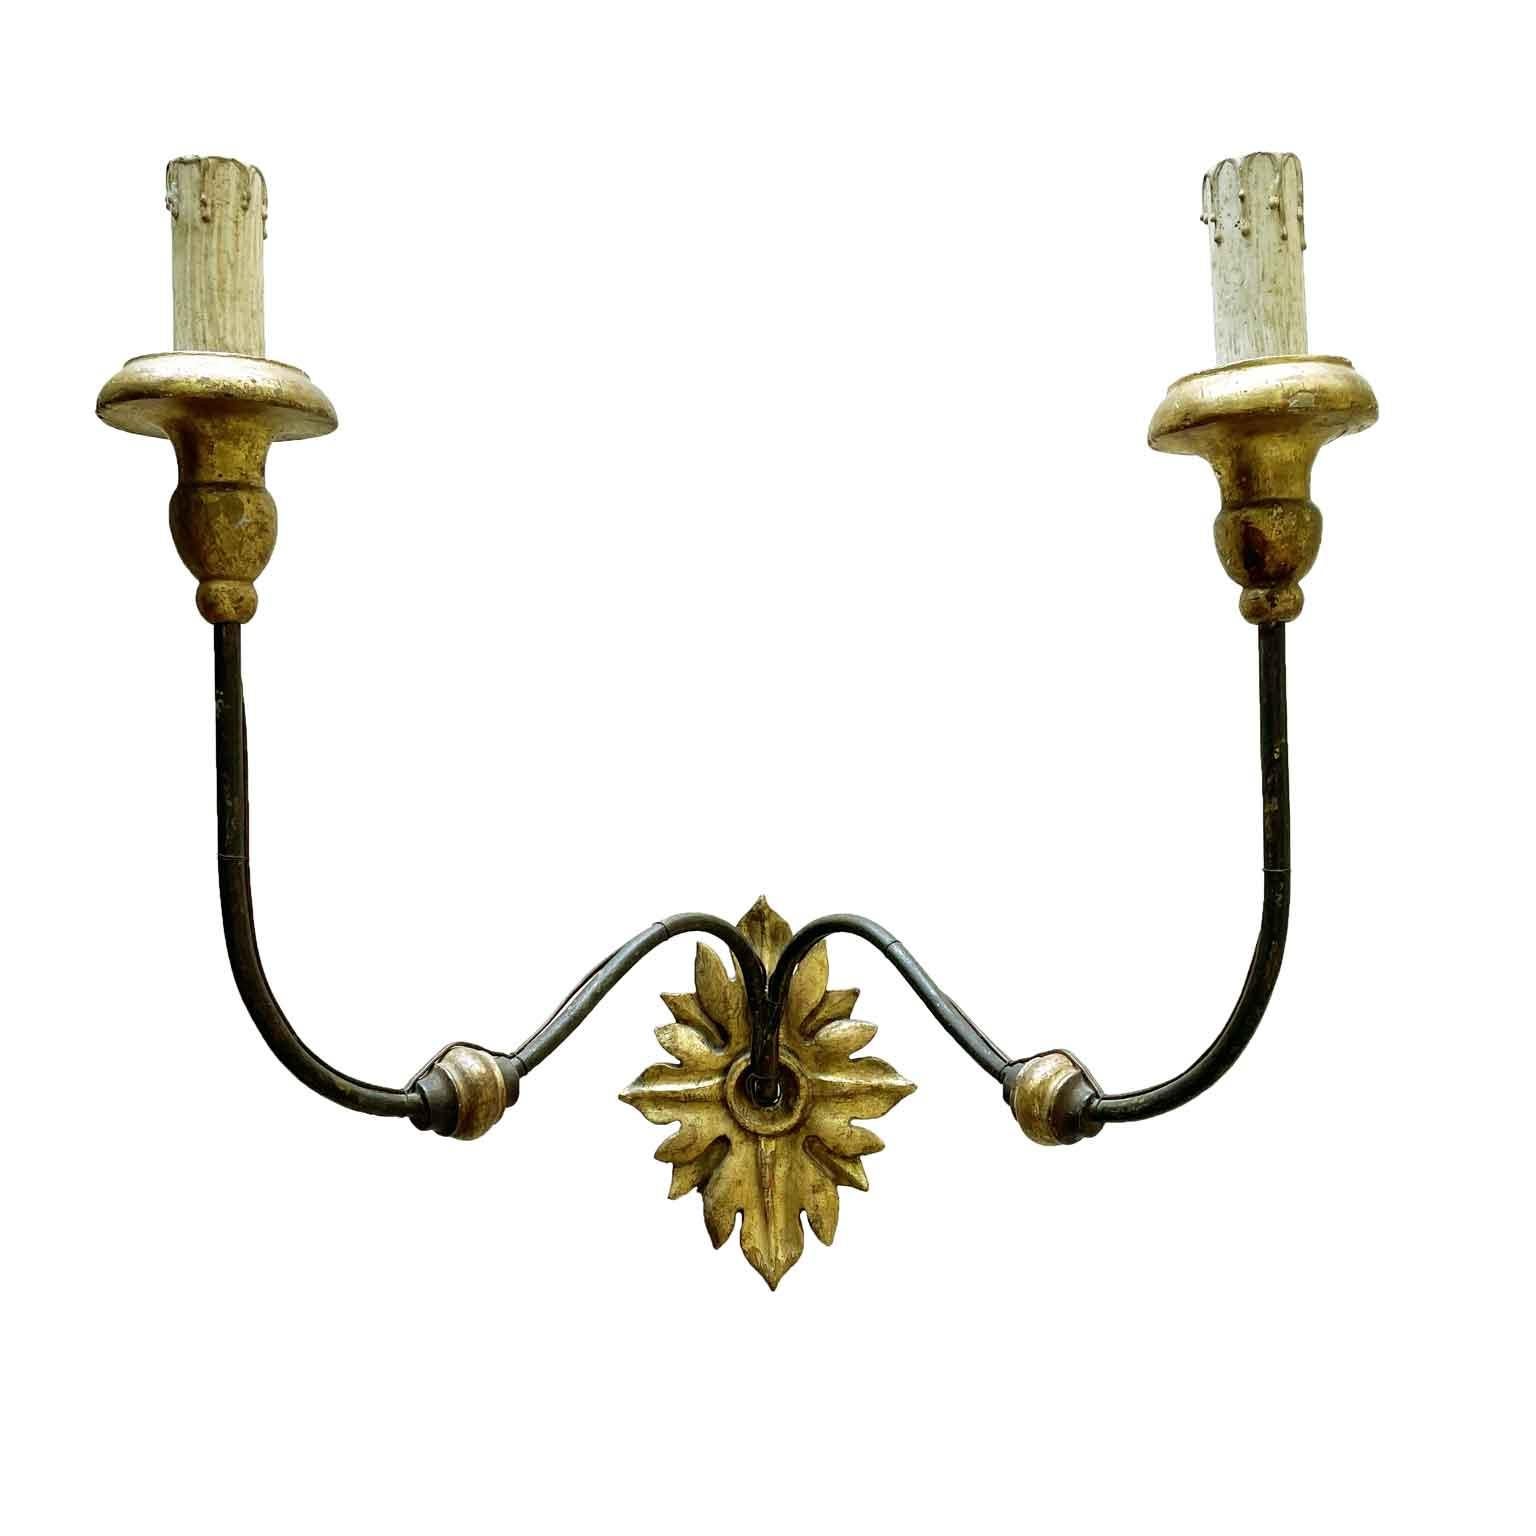 Pair of Renaissance style mid-18th century two-arm Italian sconces,  curved hand-forged arms  decorated with wooden elements and ending with turned giltwood bobeches. Feature a lovely giltwood back panel with shaped foliate carving.
Tuscan origin,